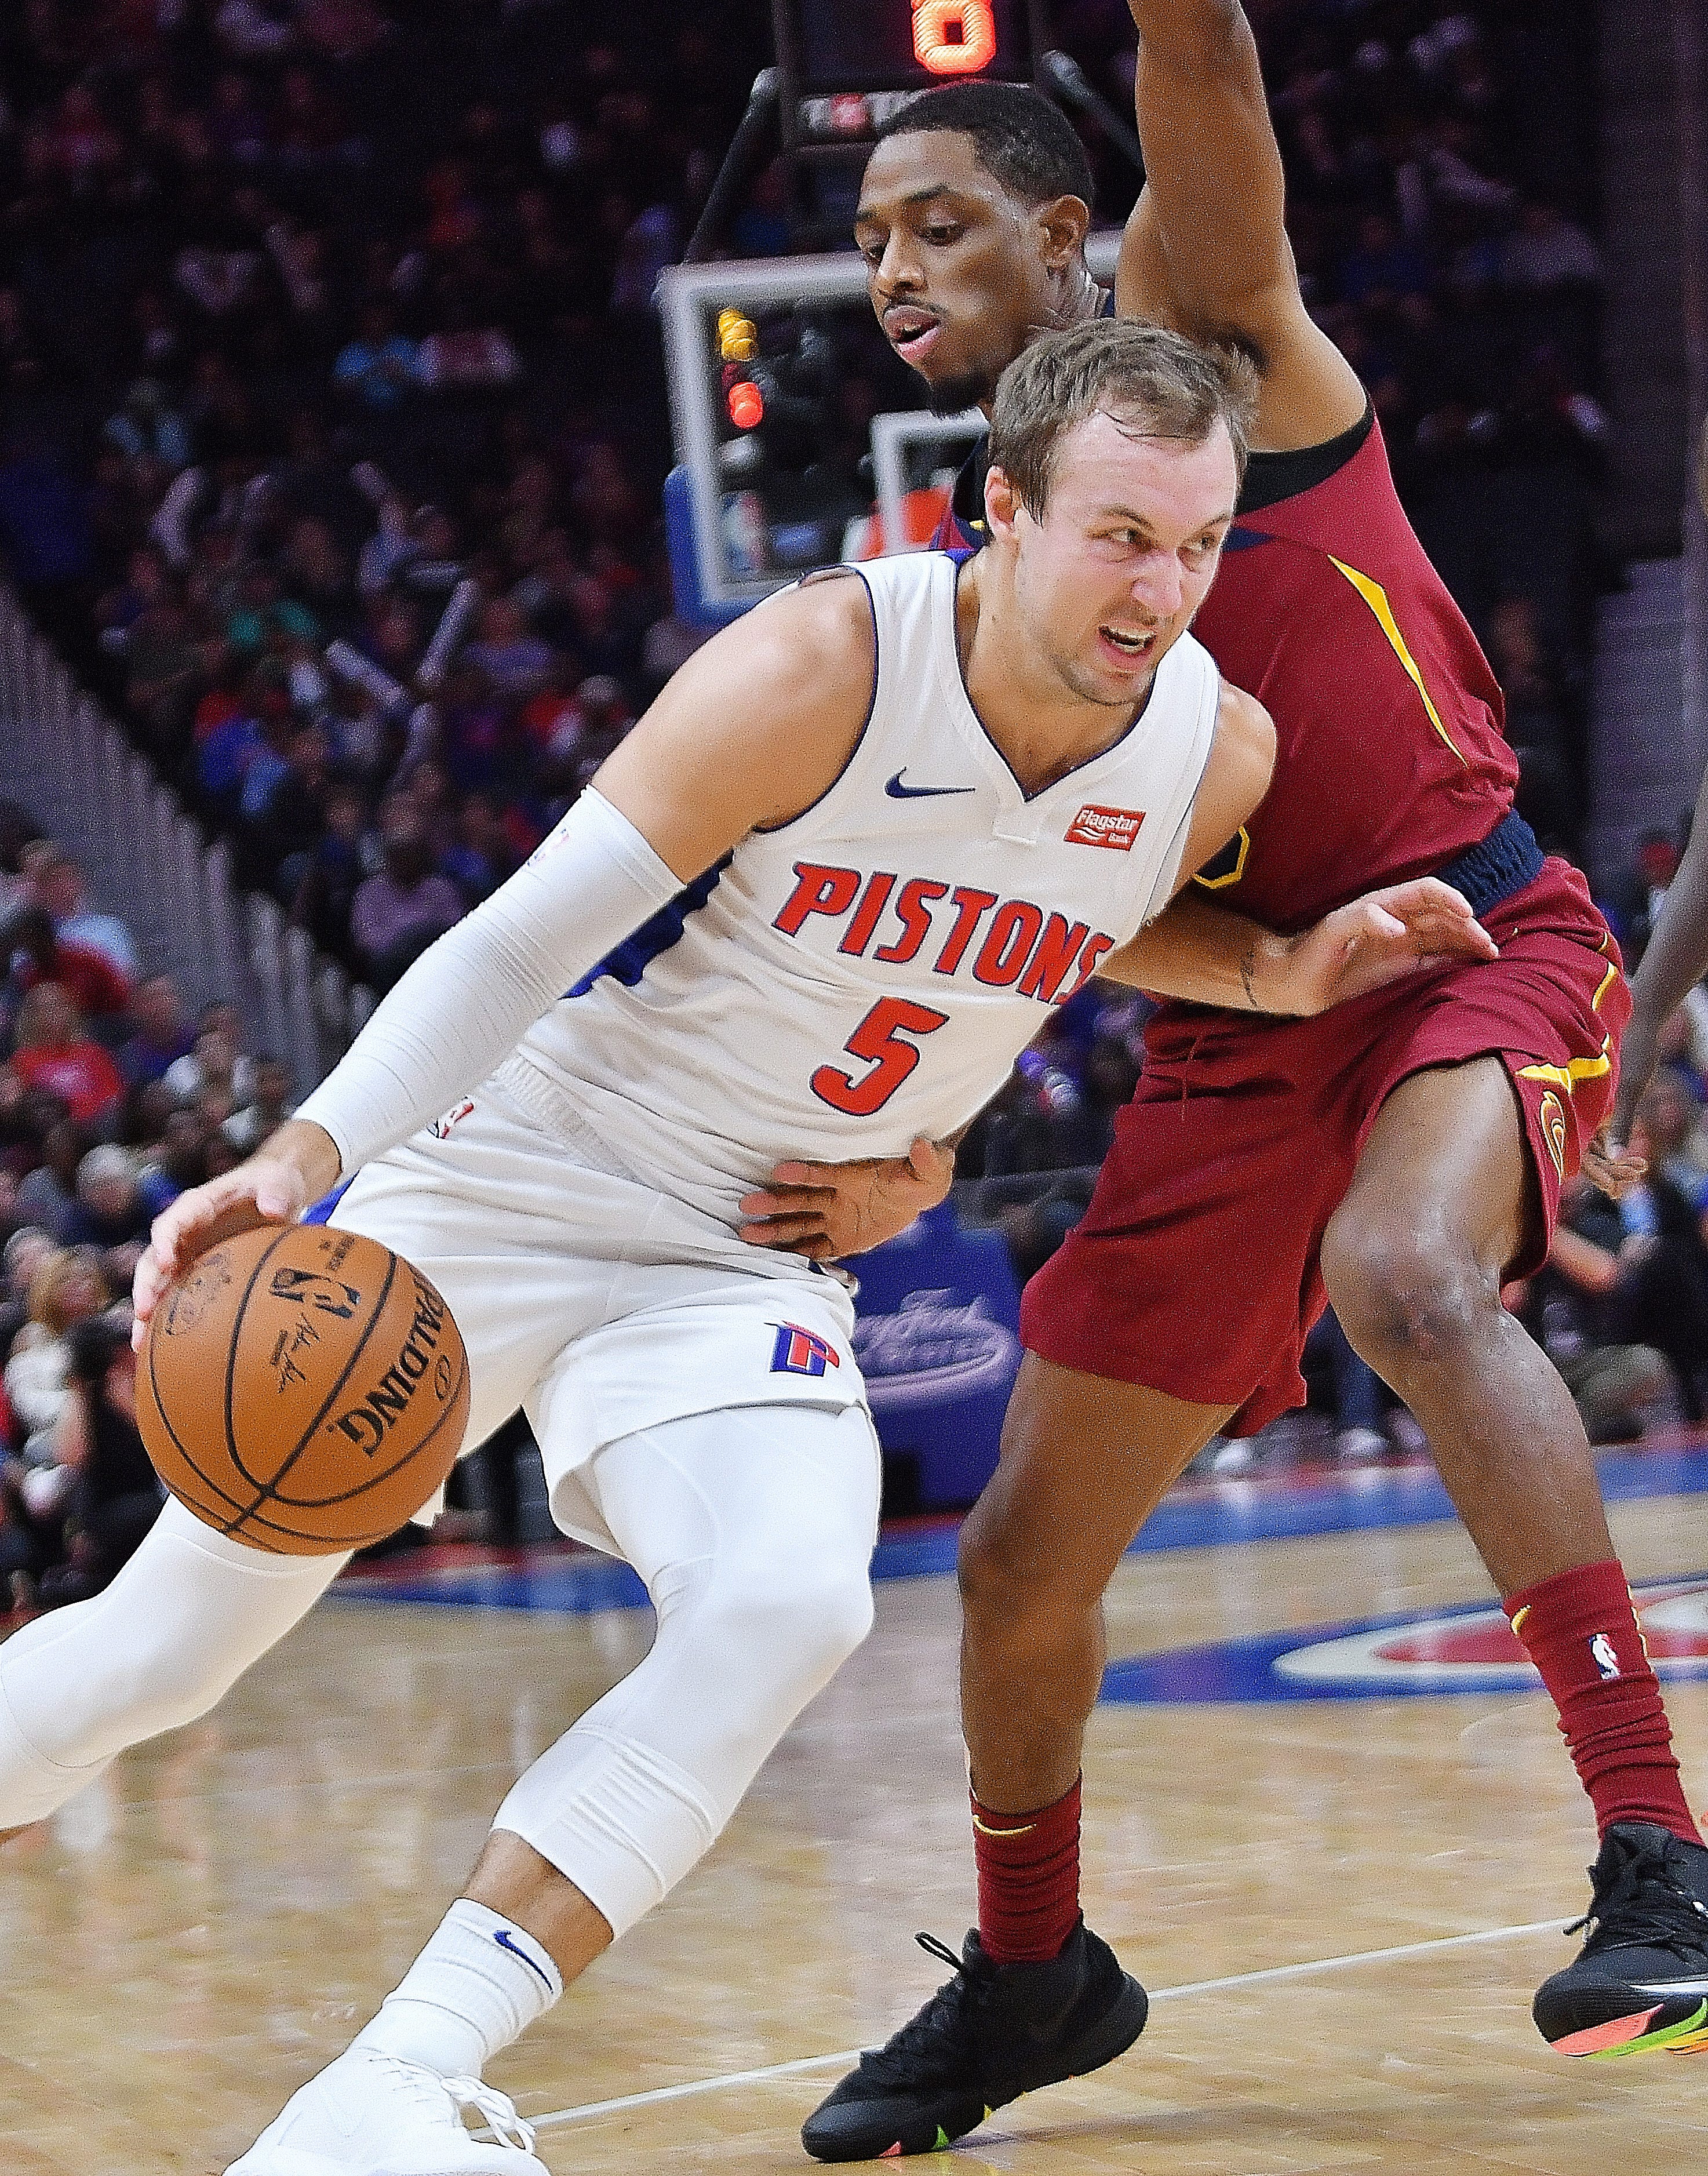 Luke Kennard: Age: 23. Ht: 6-5. Wt: 206. 2018-19 stats: 9.7 pts, 2.9 rebs, 39% 3FG. Outlook: In his third season, Kennard is poised for a breakout and will have a solid complementary cast in the second unit. He has the green light to shoot, but he ’ ll also help by facilitating and being selective in which ones he takes.